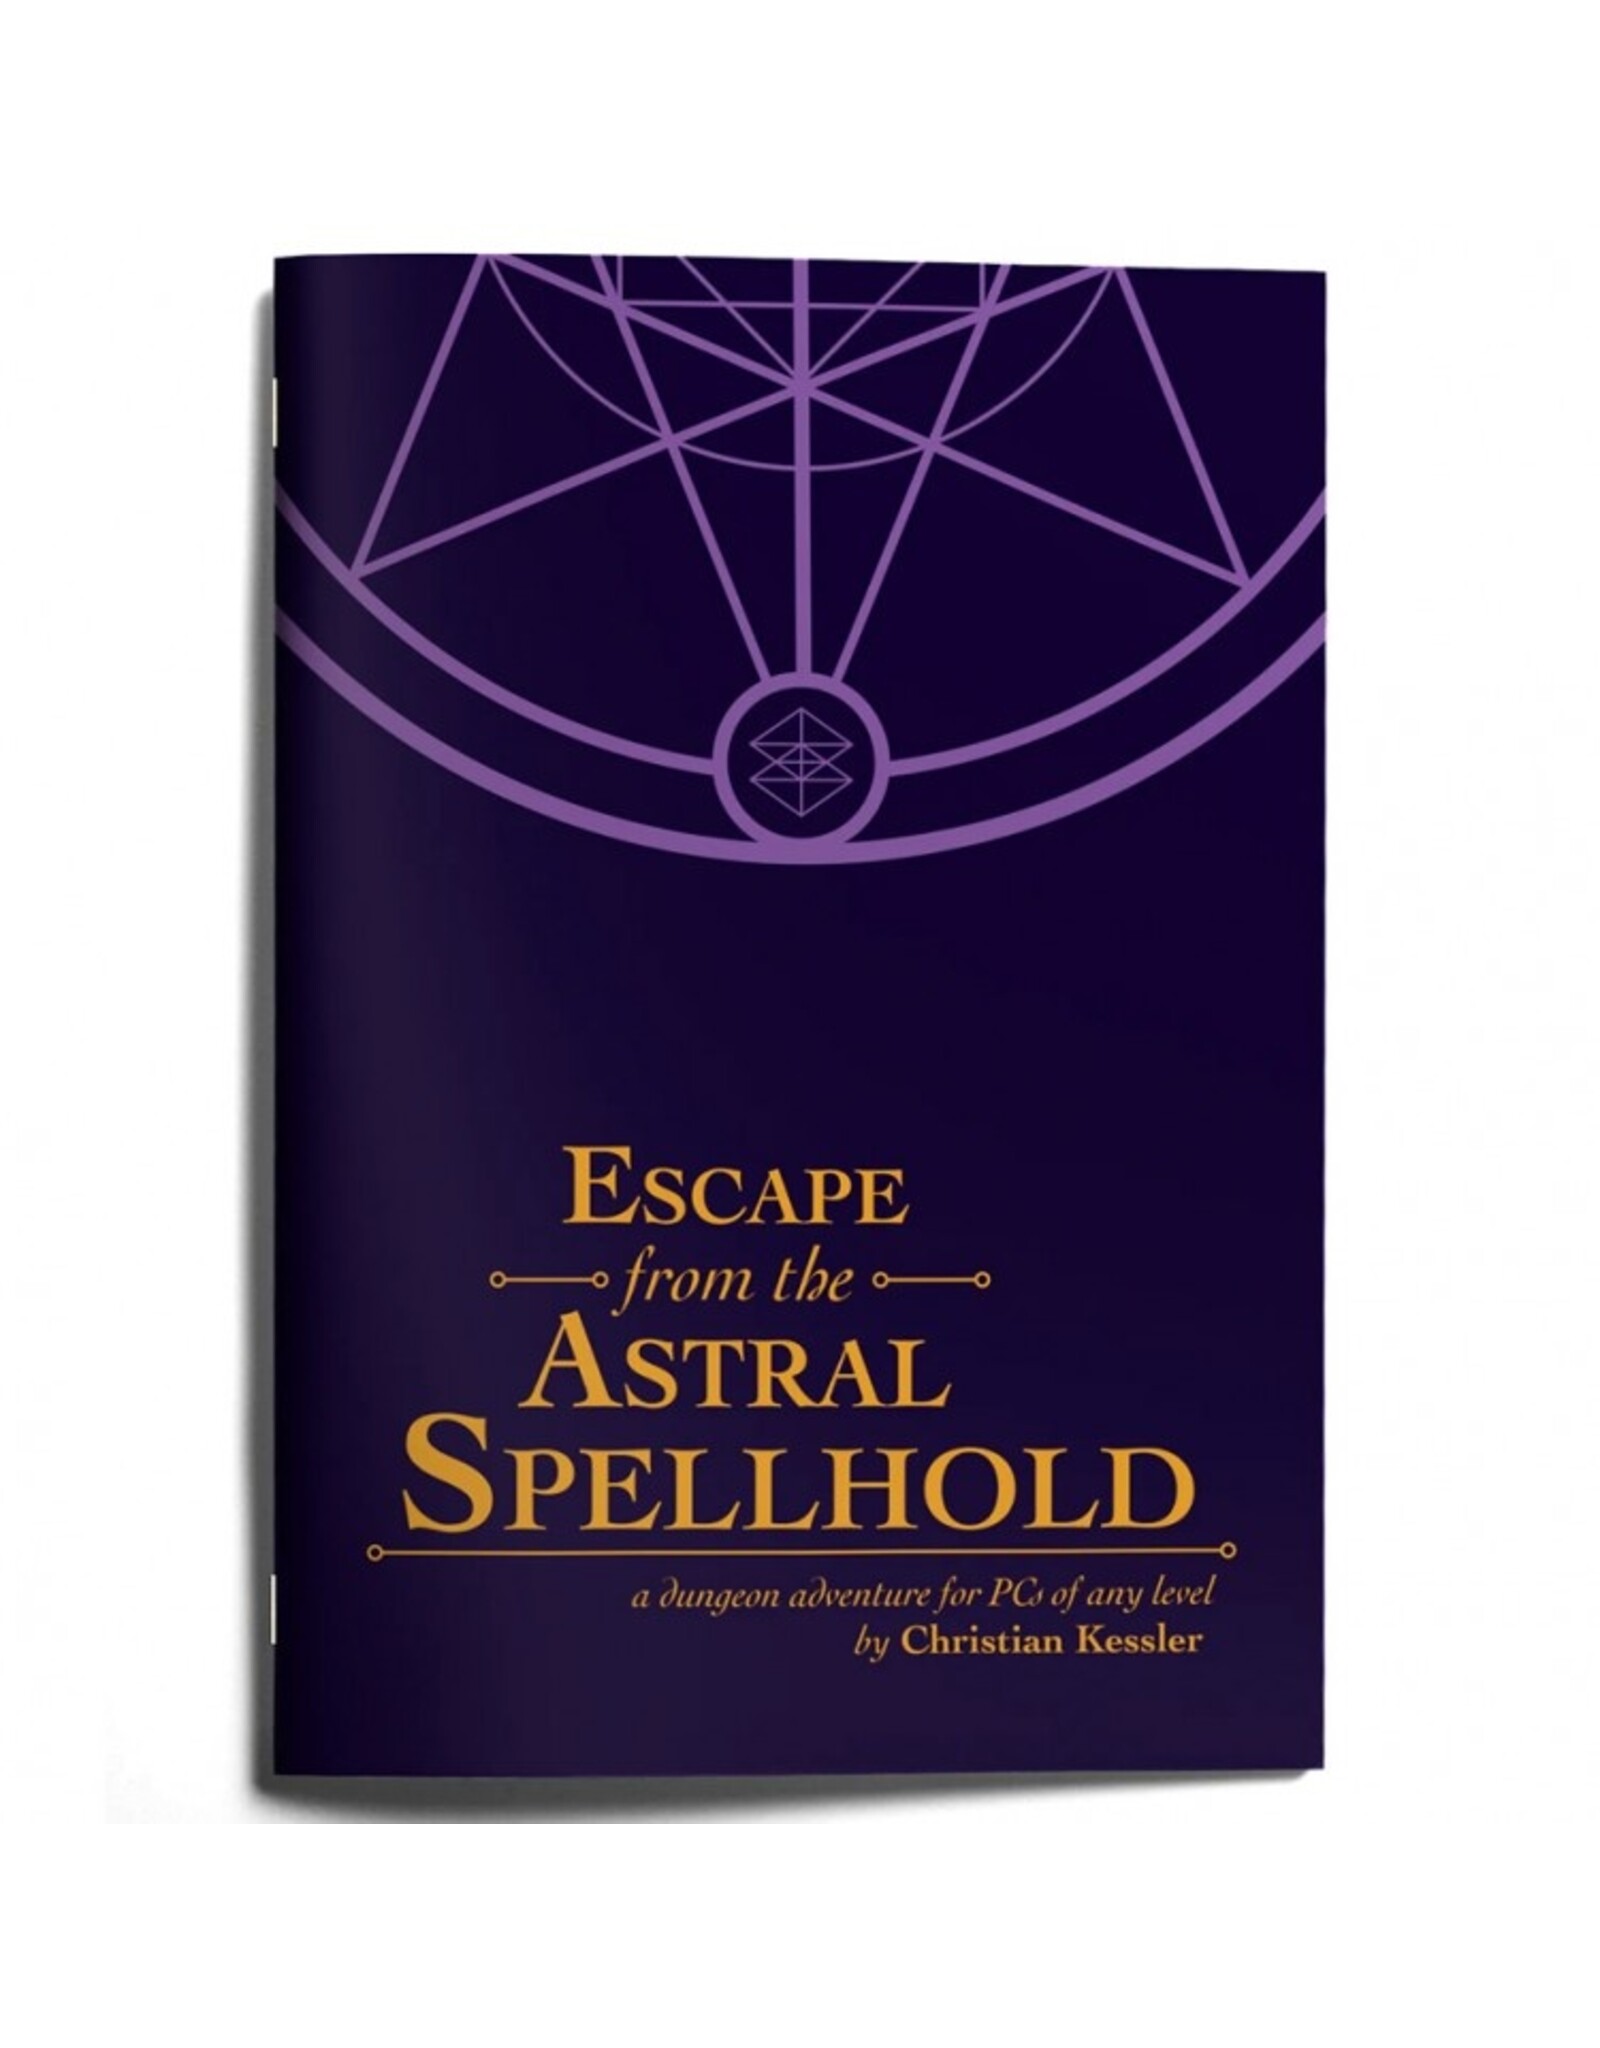 Exalted Funeral Press Escape from the Astral Spellhold